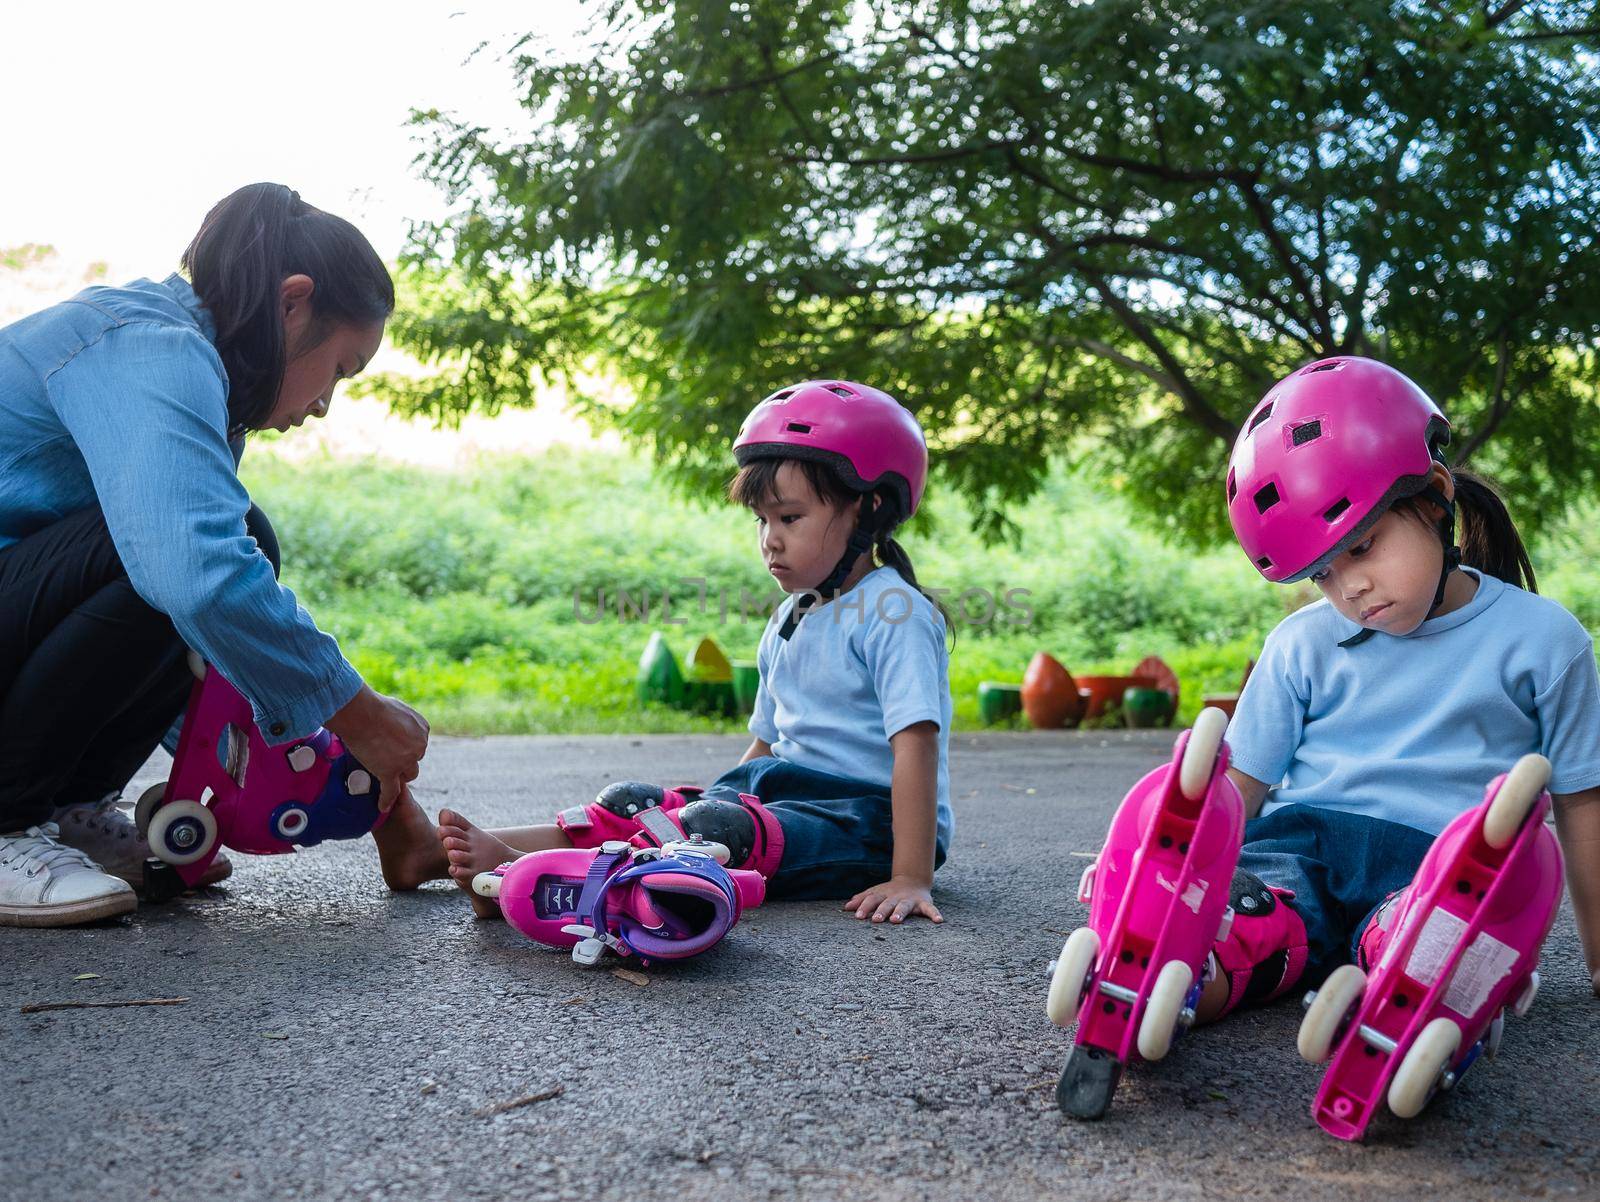 Young mother helps her daughter put on protective pads and a safety helmet before her roller skating practice on the park road. Active outdoor sport for kids. by TEERASAK